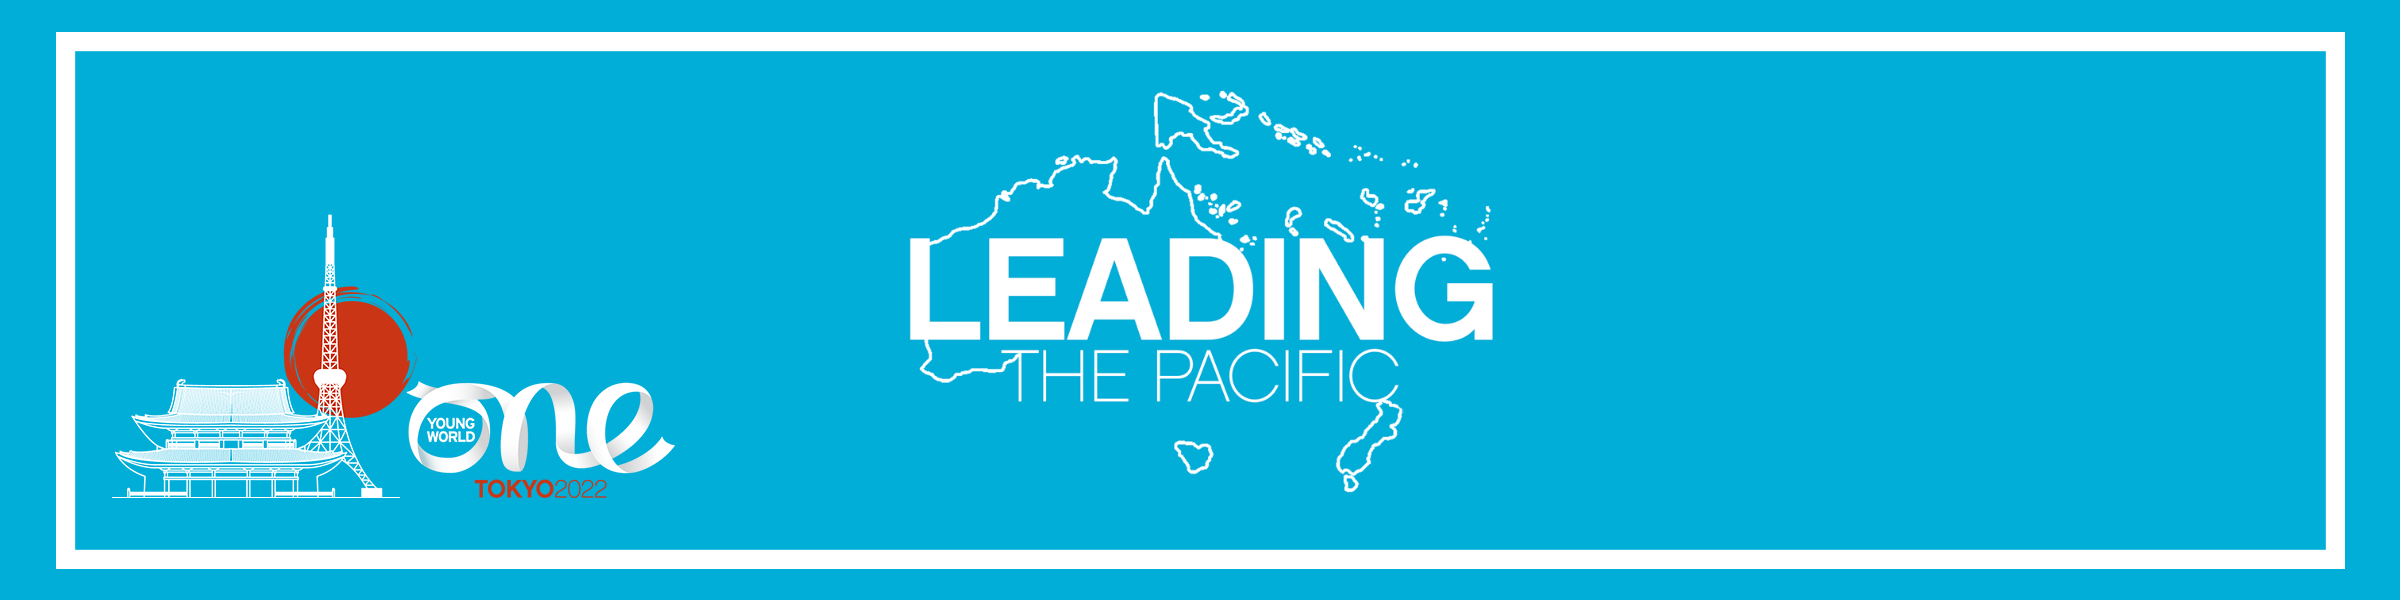 Leading the Pacific Scholarship Banner